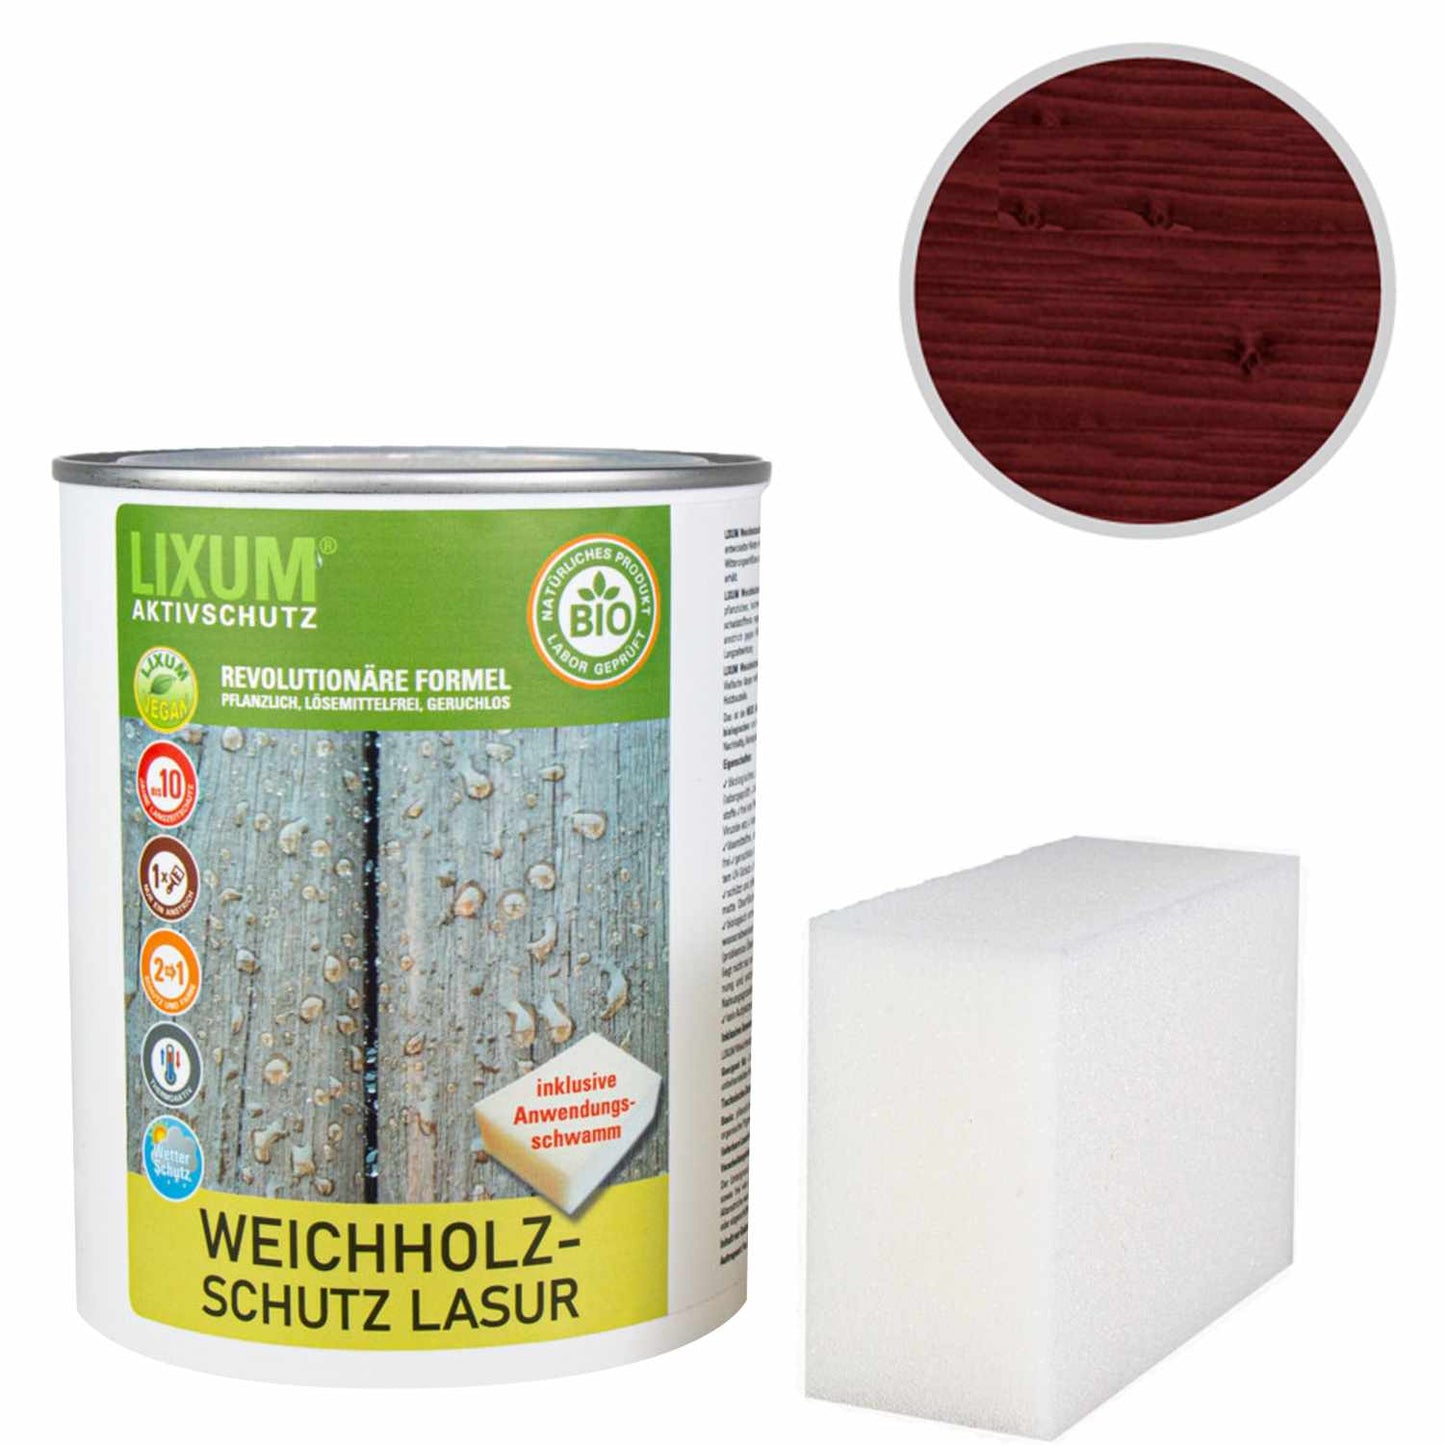 Biological wood protection softwood protection glaze - poplar - wood protection & wood care for outside